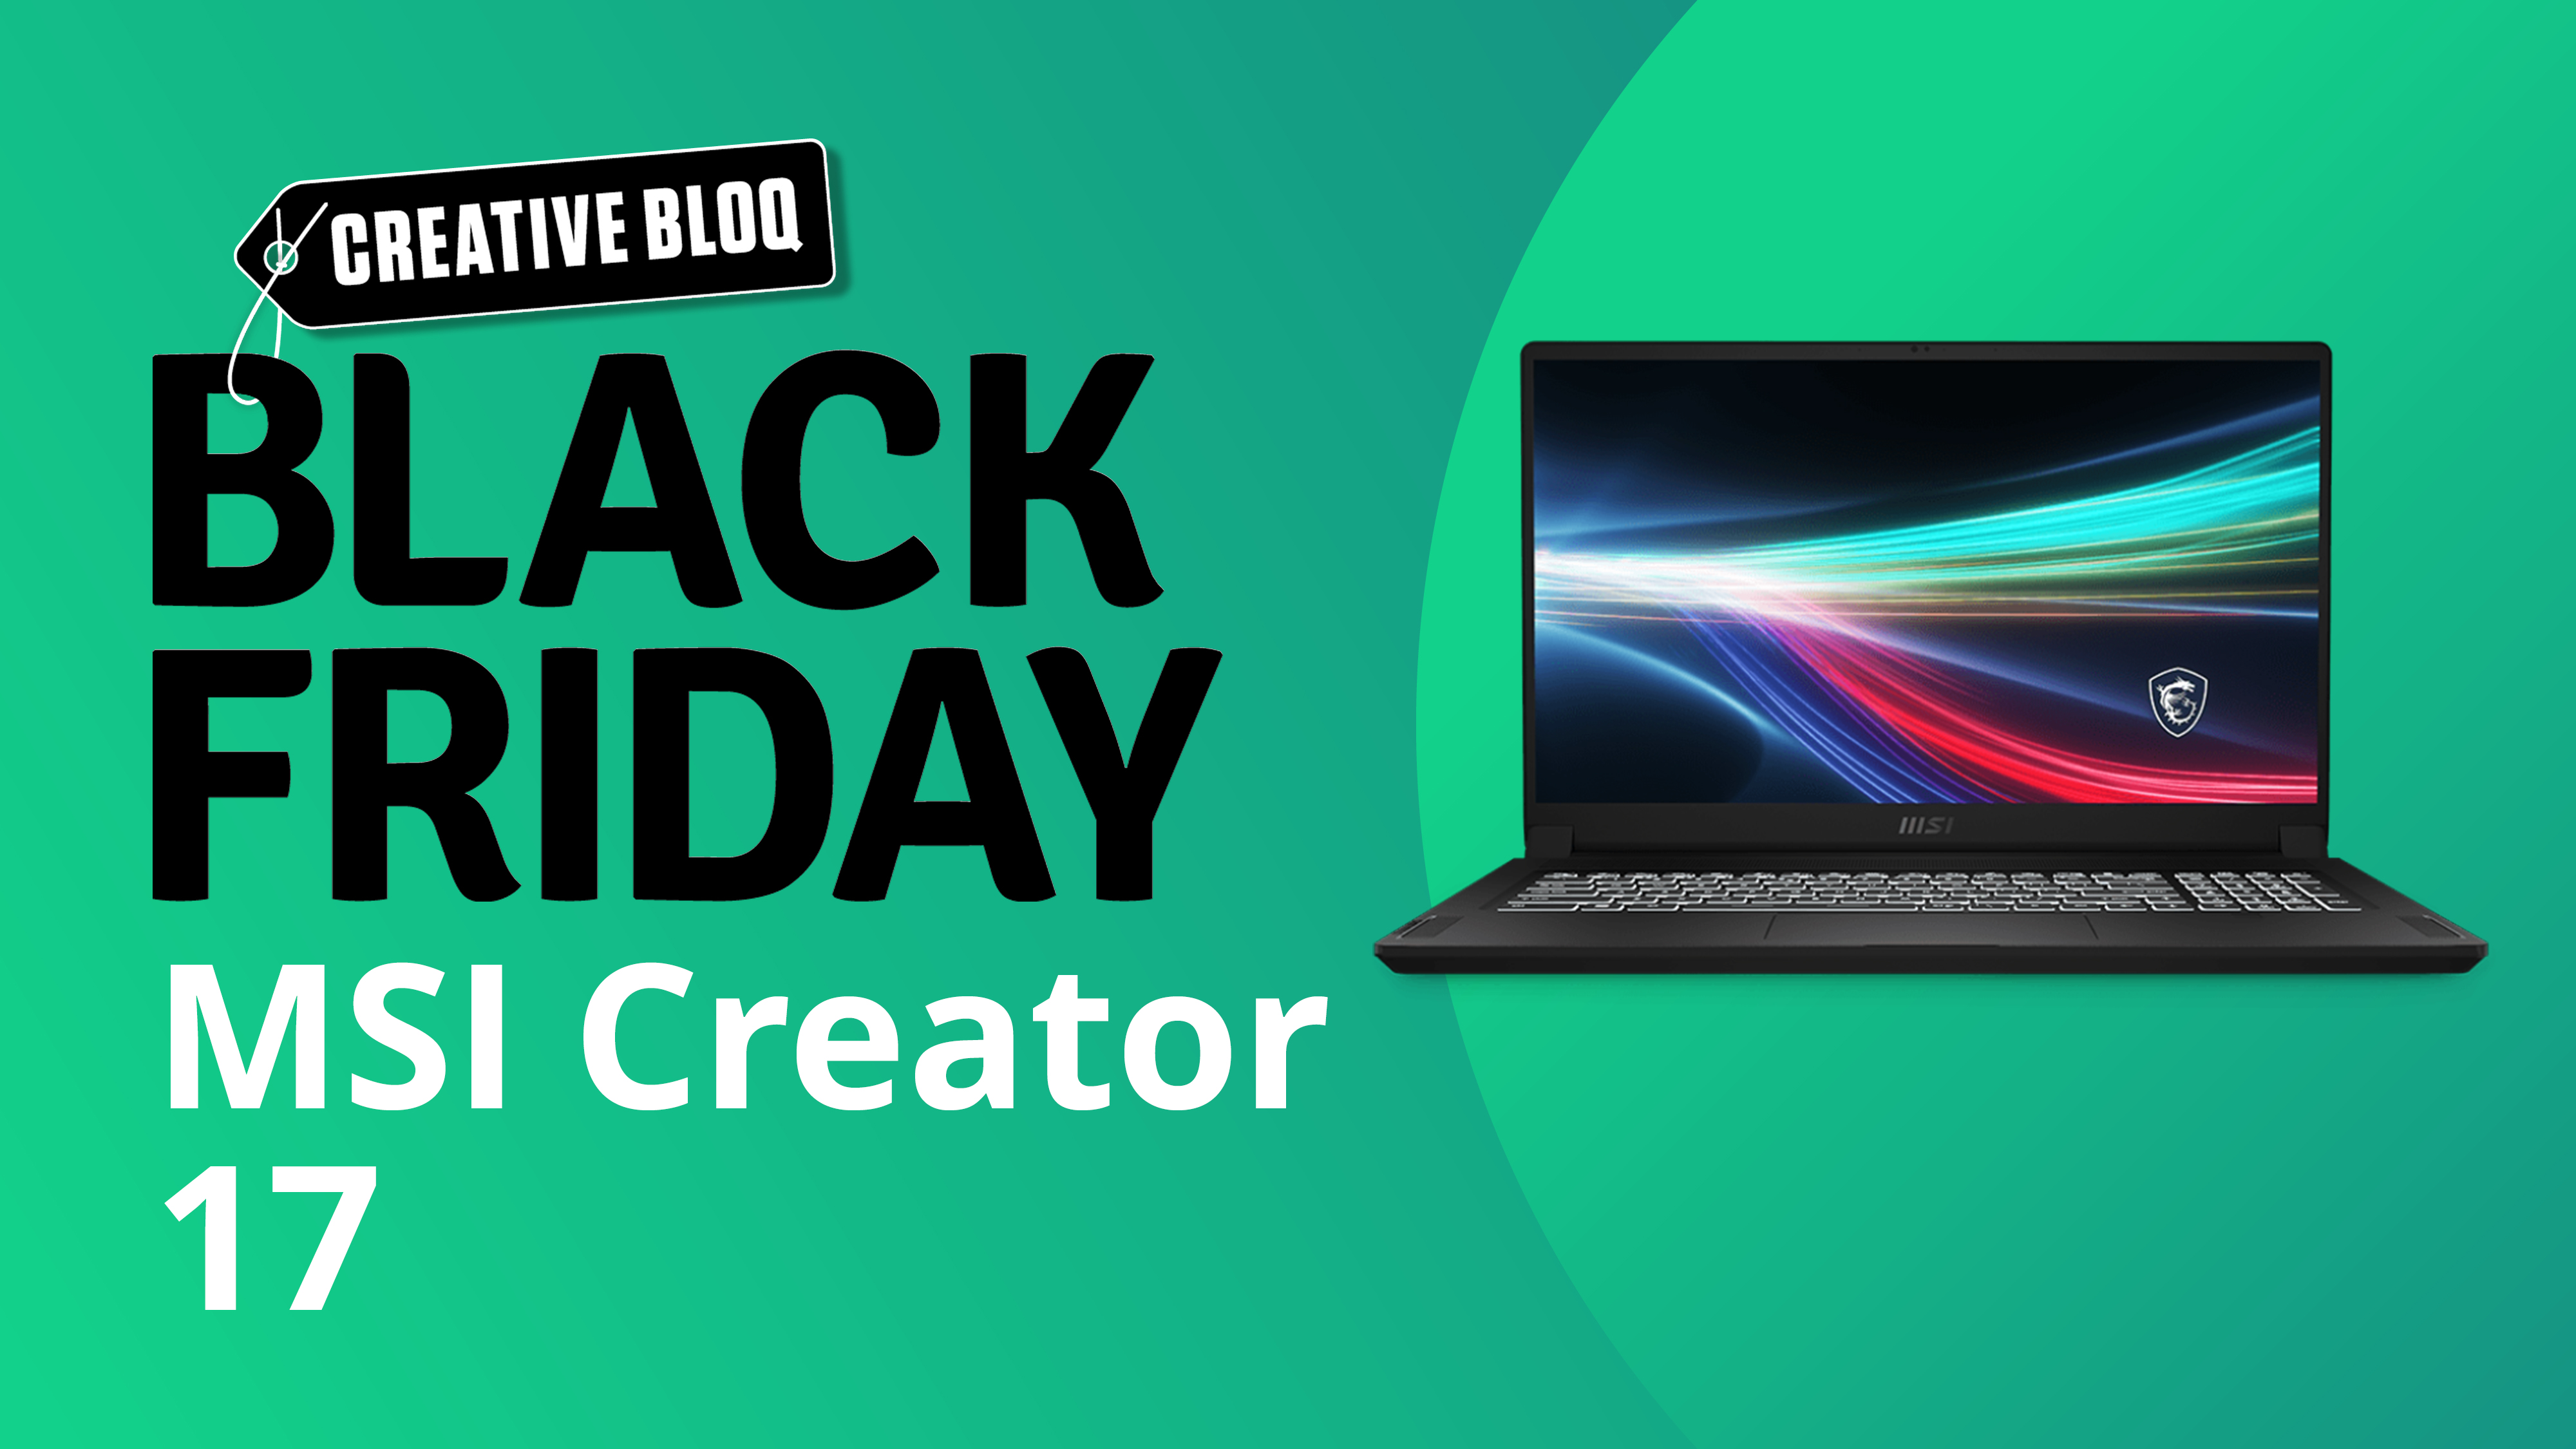 A laptop Black Friday deals image with Creative Bloq Black Friday MSI Creator 17 text next to an image of a laptop on a green background